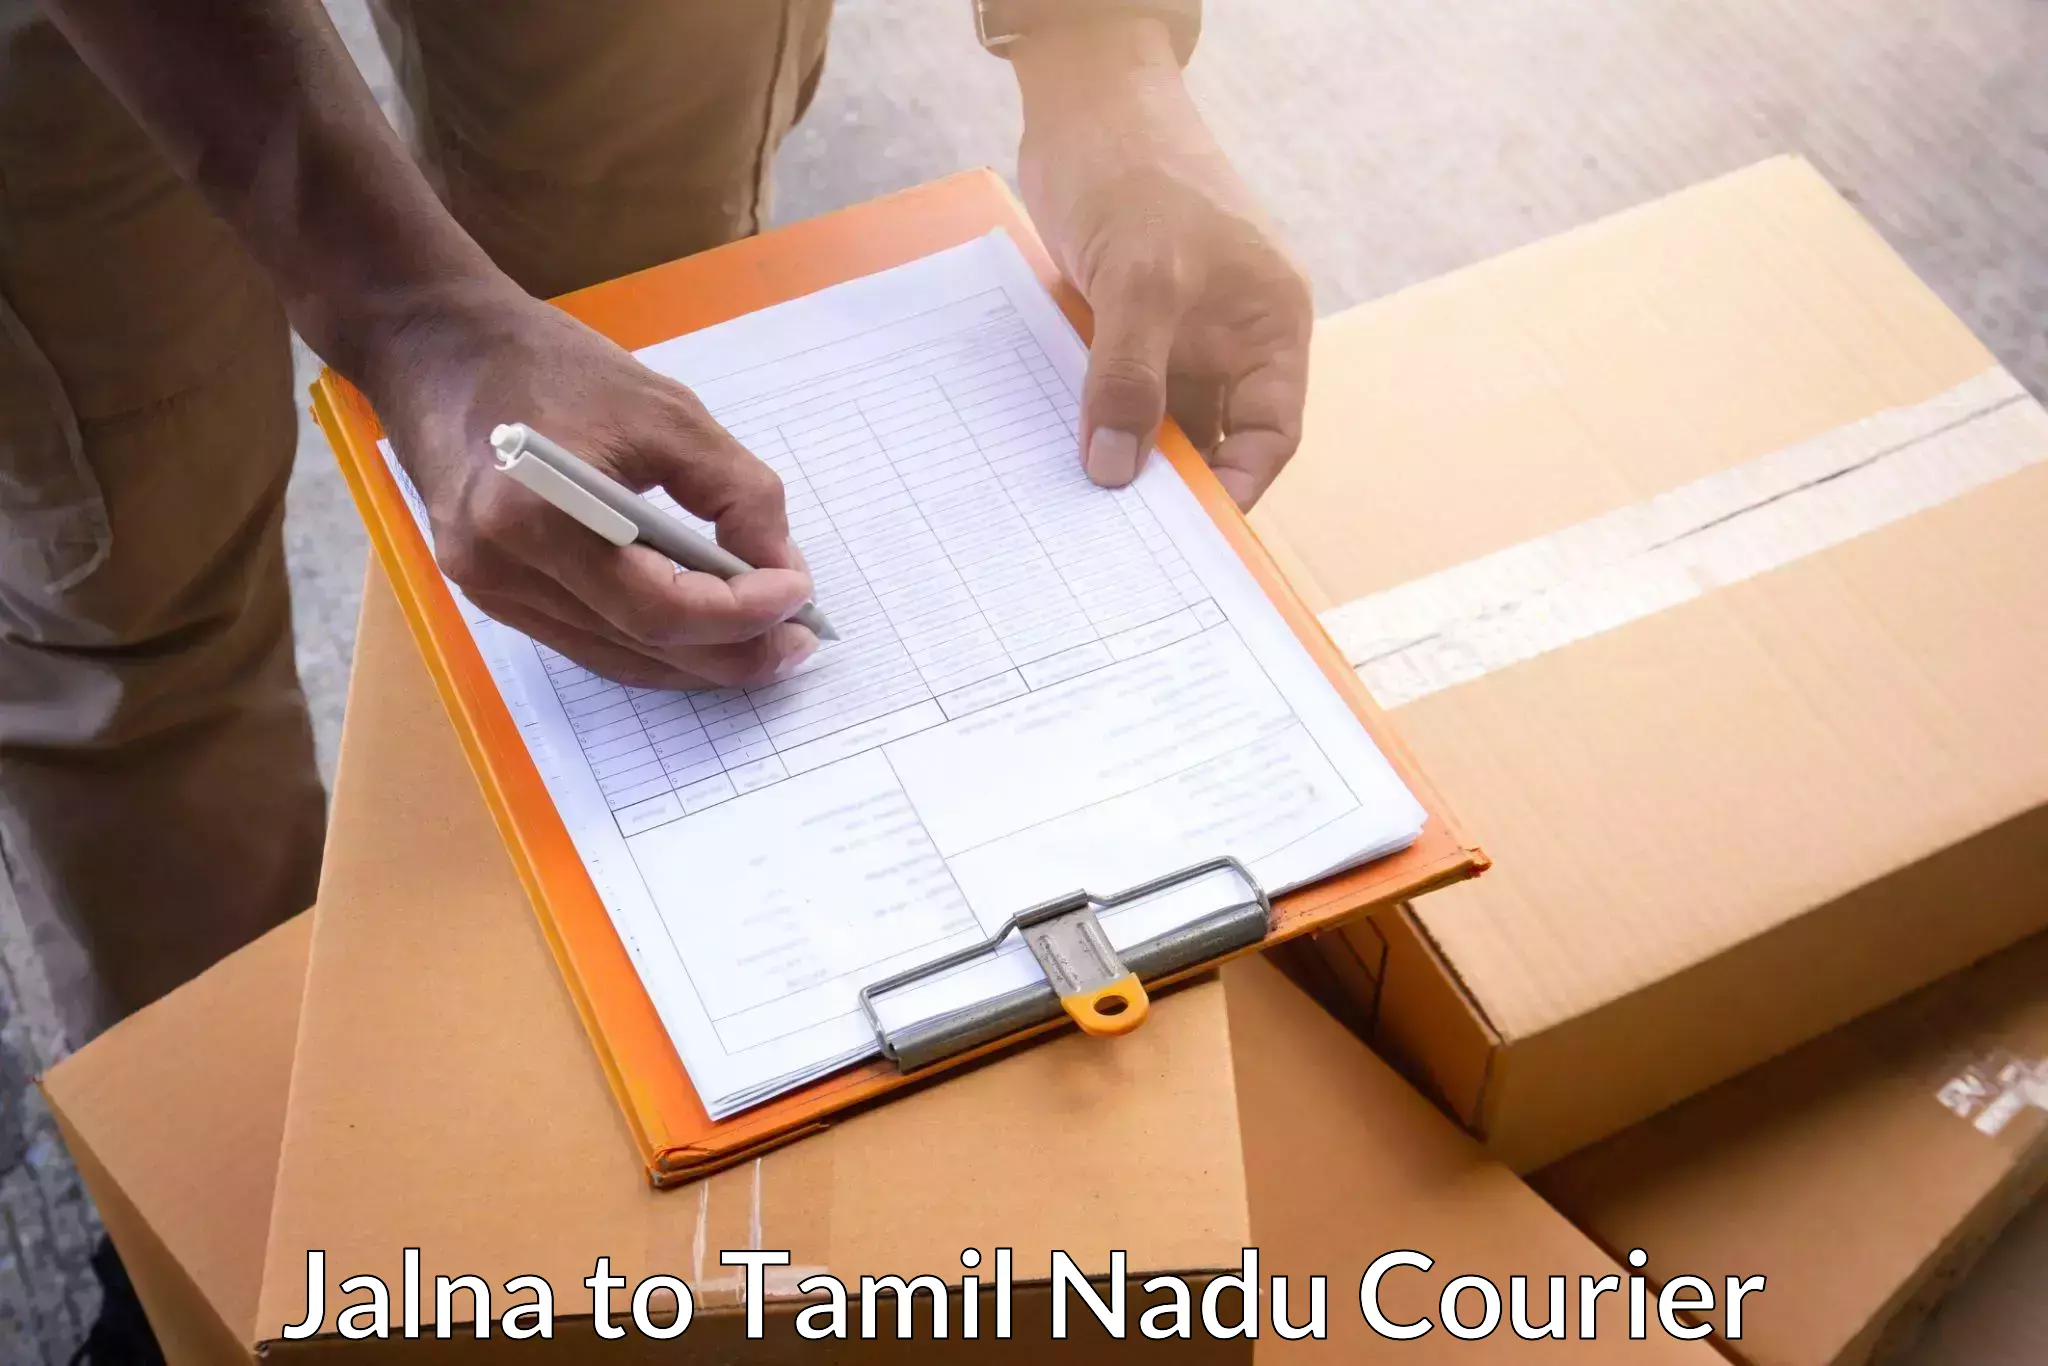 Personalized courier experiences Jalna to Tallakulam